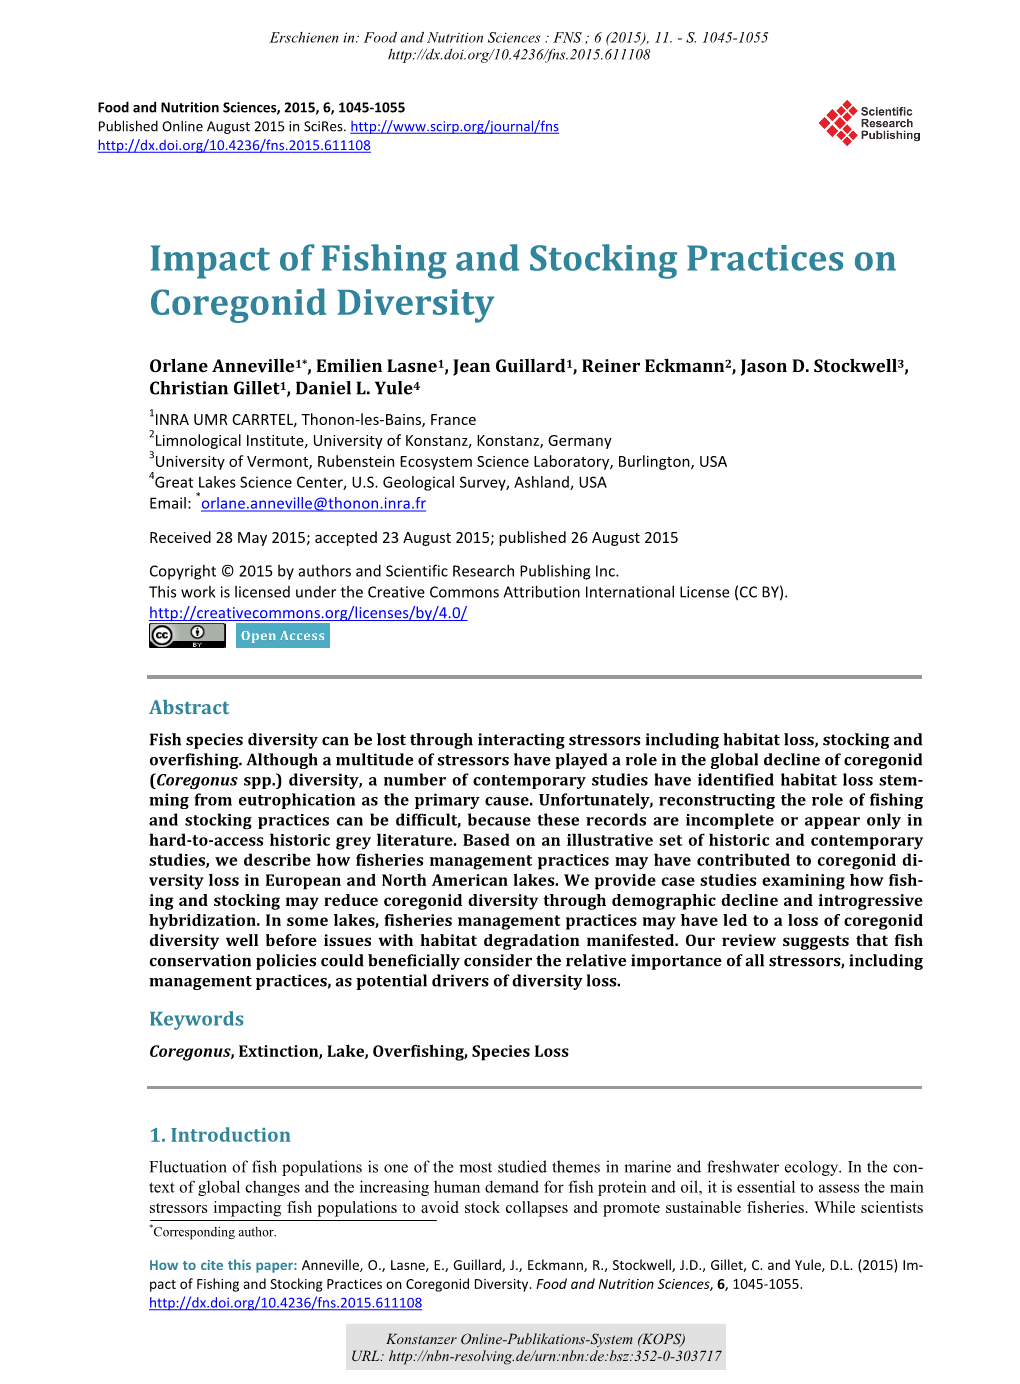 Impact of Fishing and Stocking Practices on Coregonid Diversity